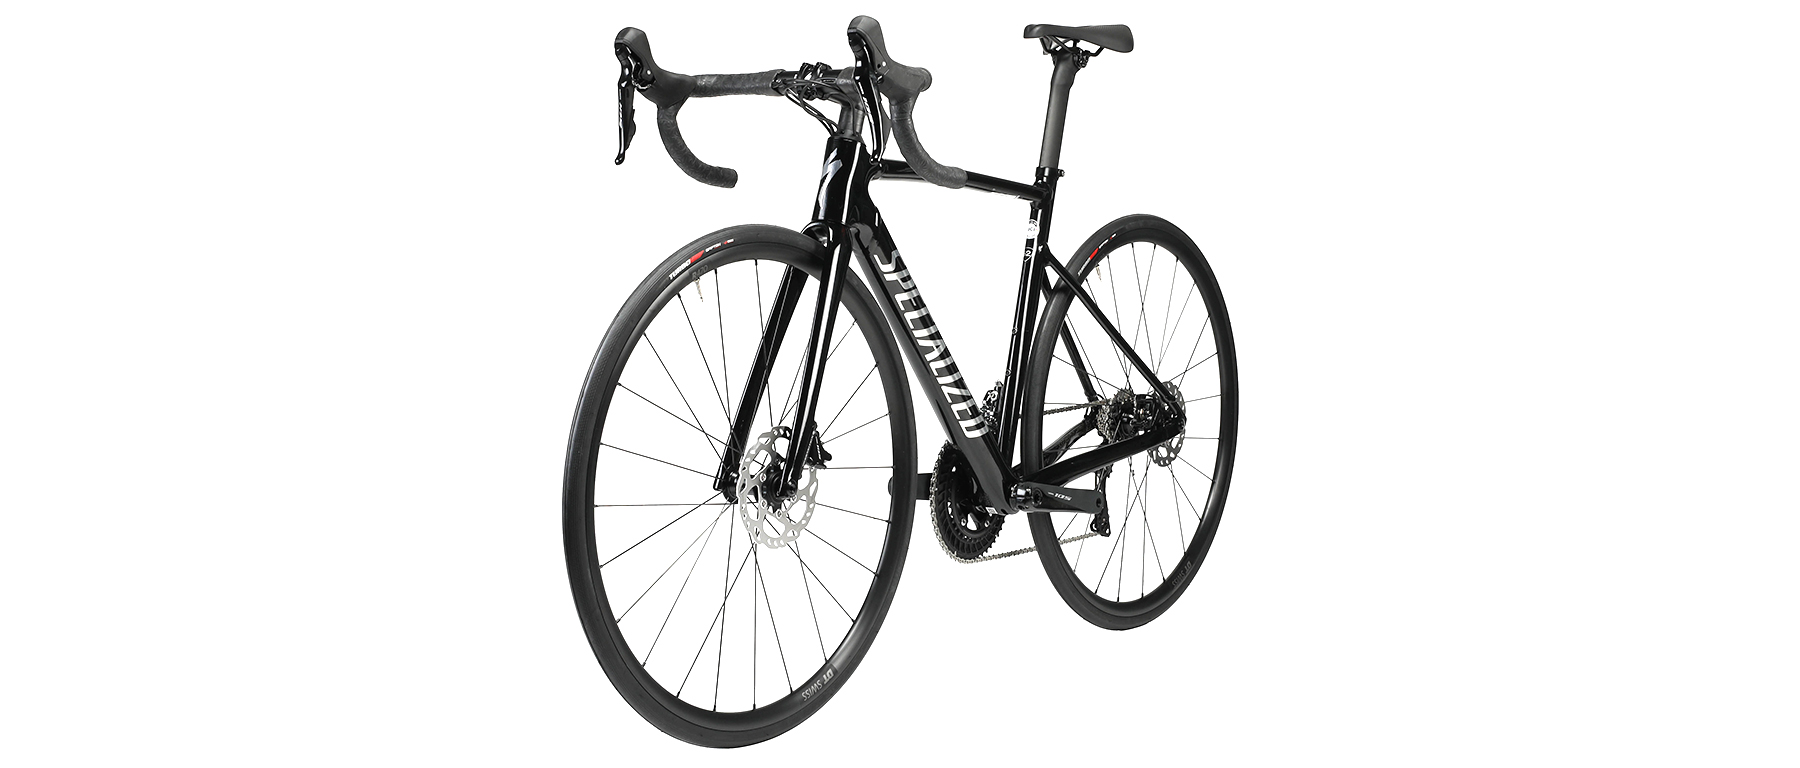 Specialized Allez Sprint 105 R7000 Disc Comp Bicycle 2022